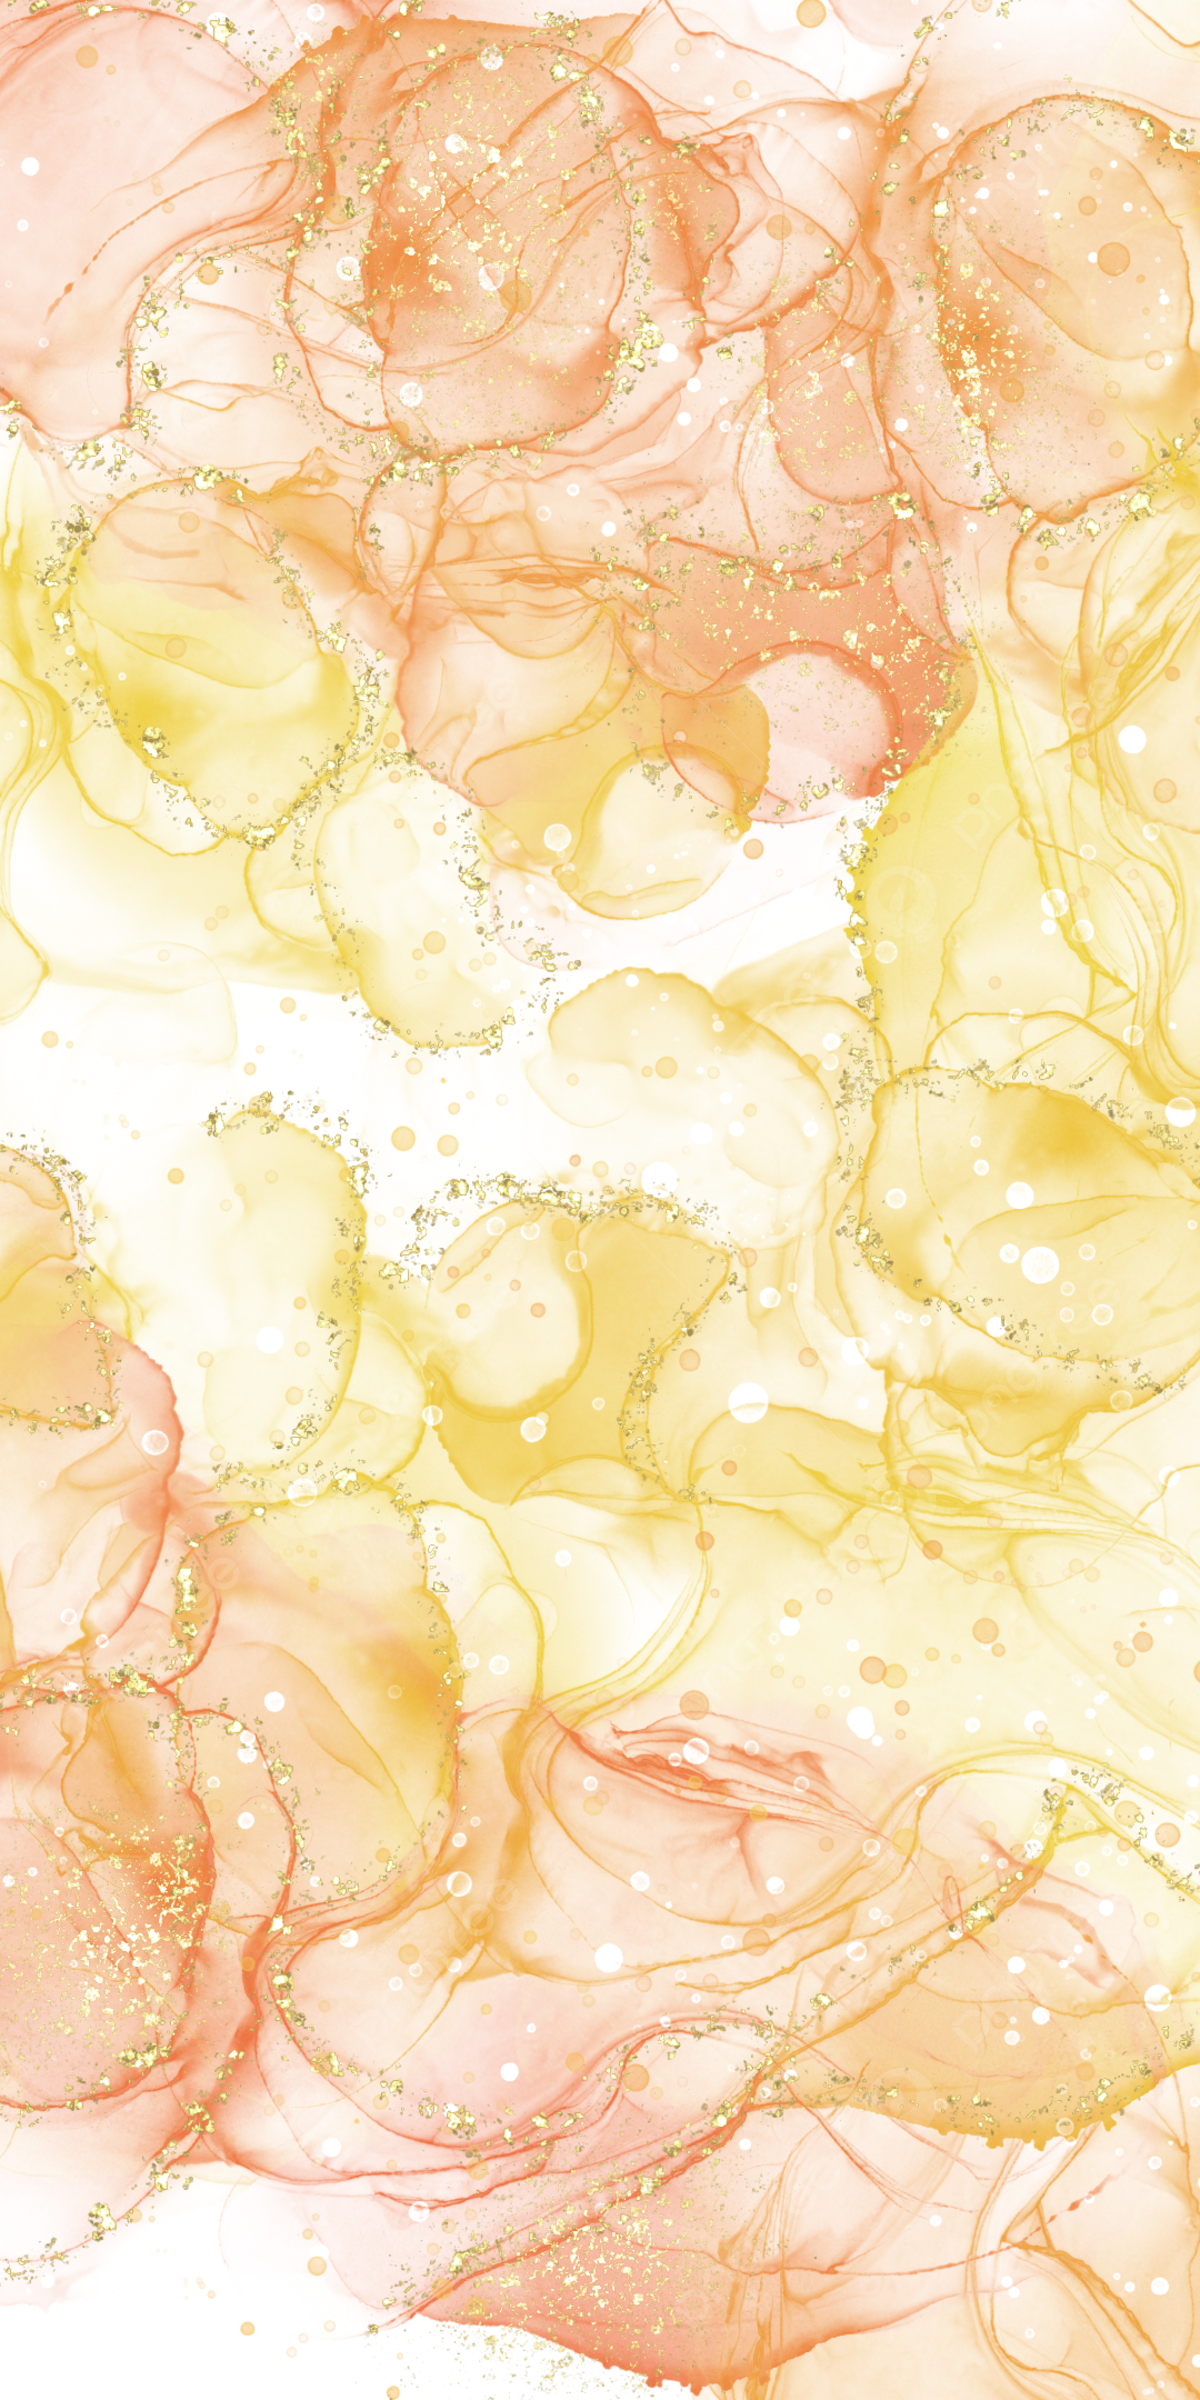 Orange Yellow Marble With Gold Sparkle Background Wallpaper Image For Free Download